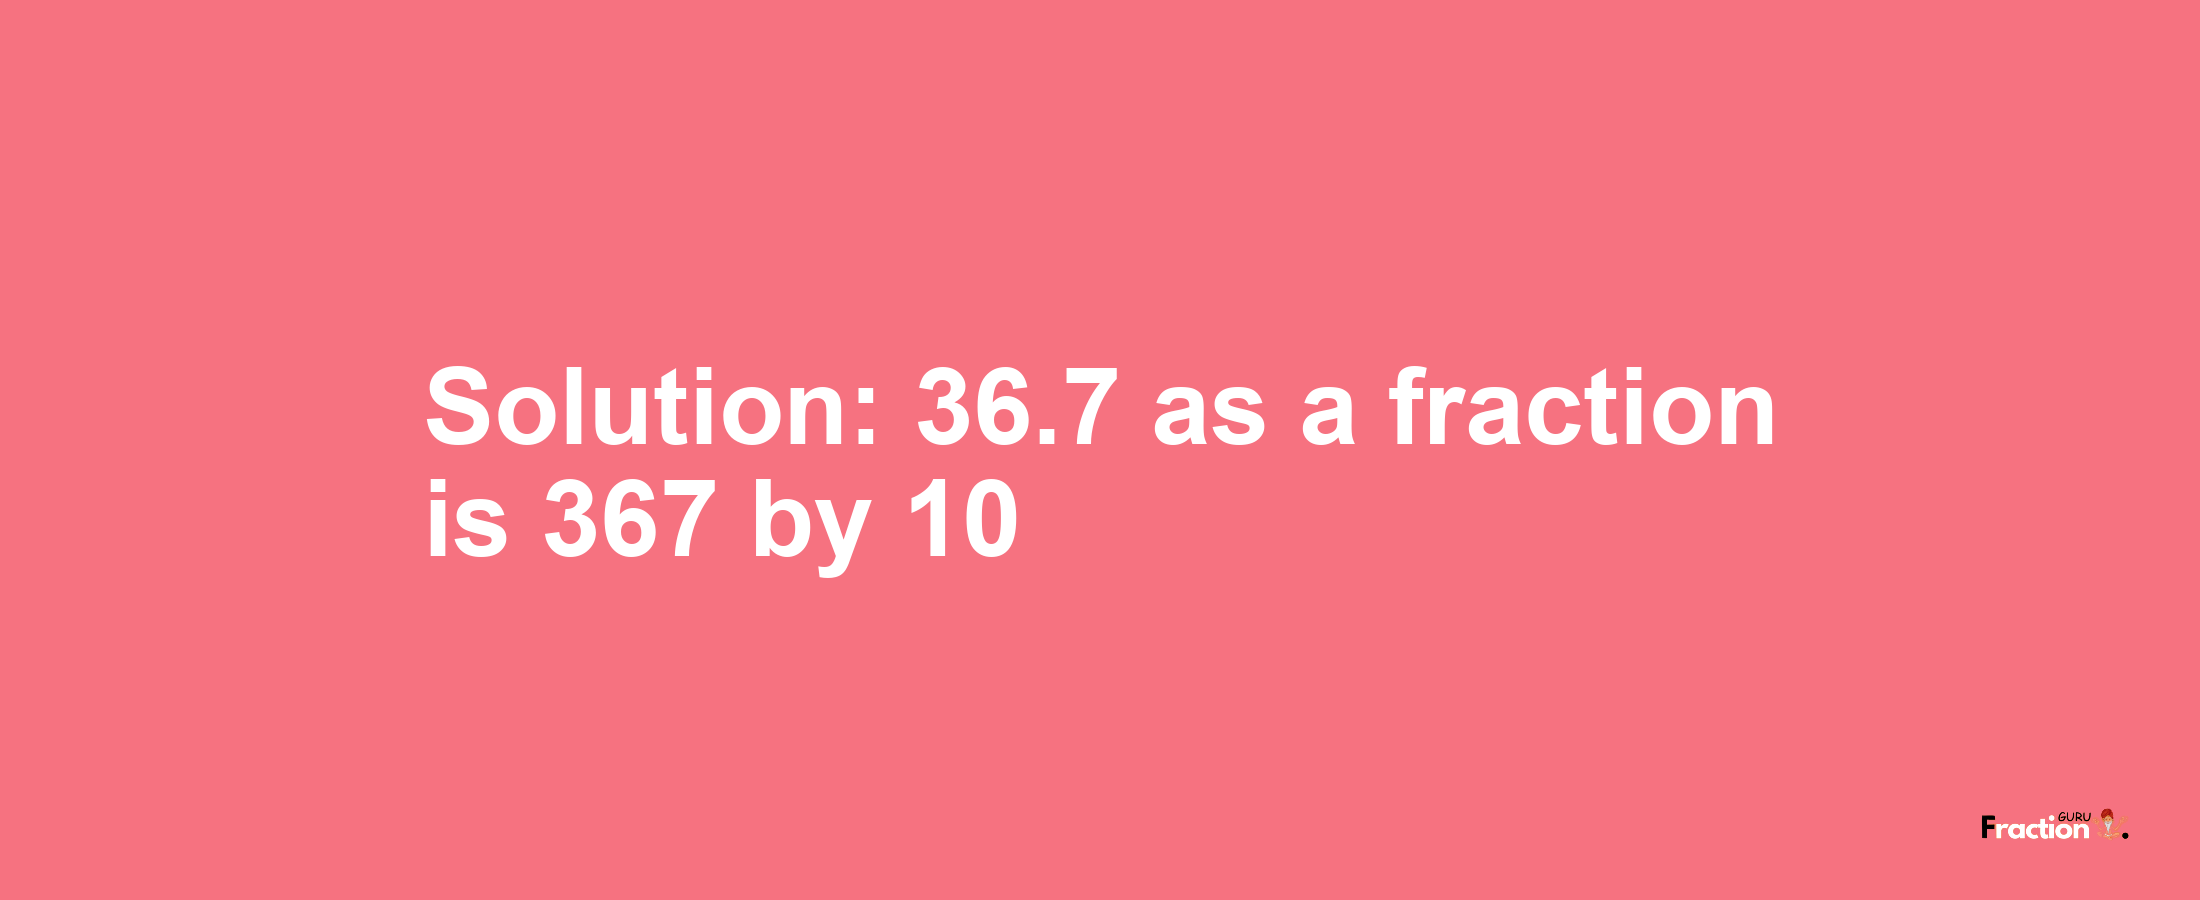 Solution:36.7 as a fraction is 367/10